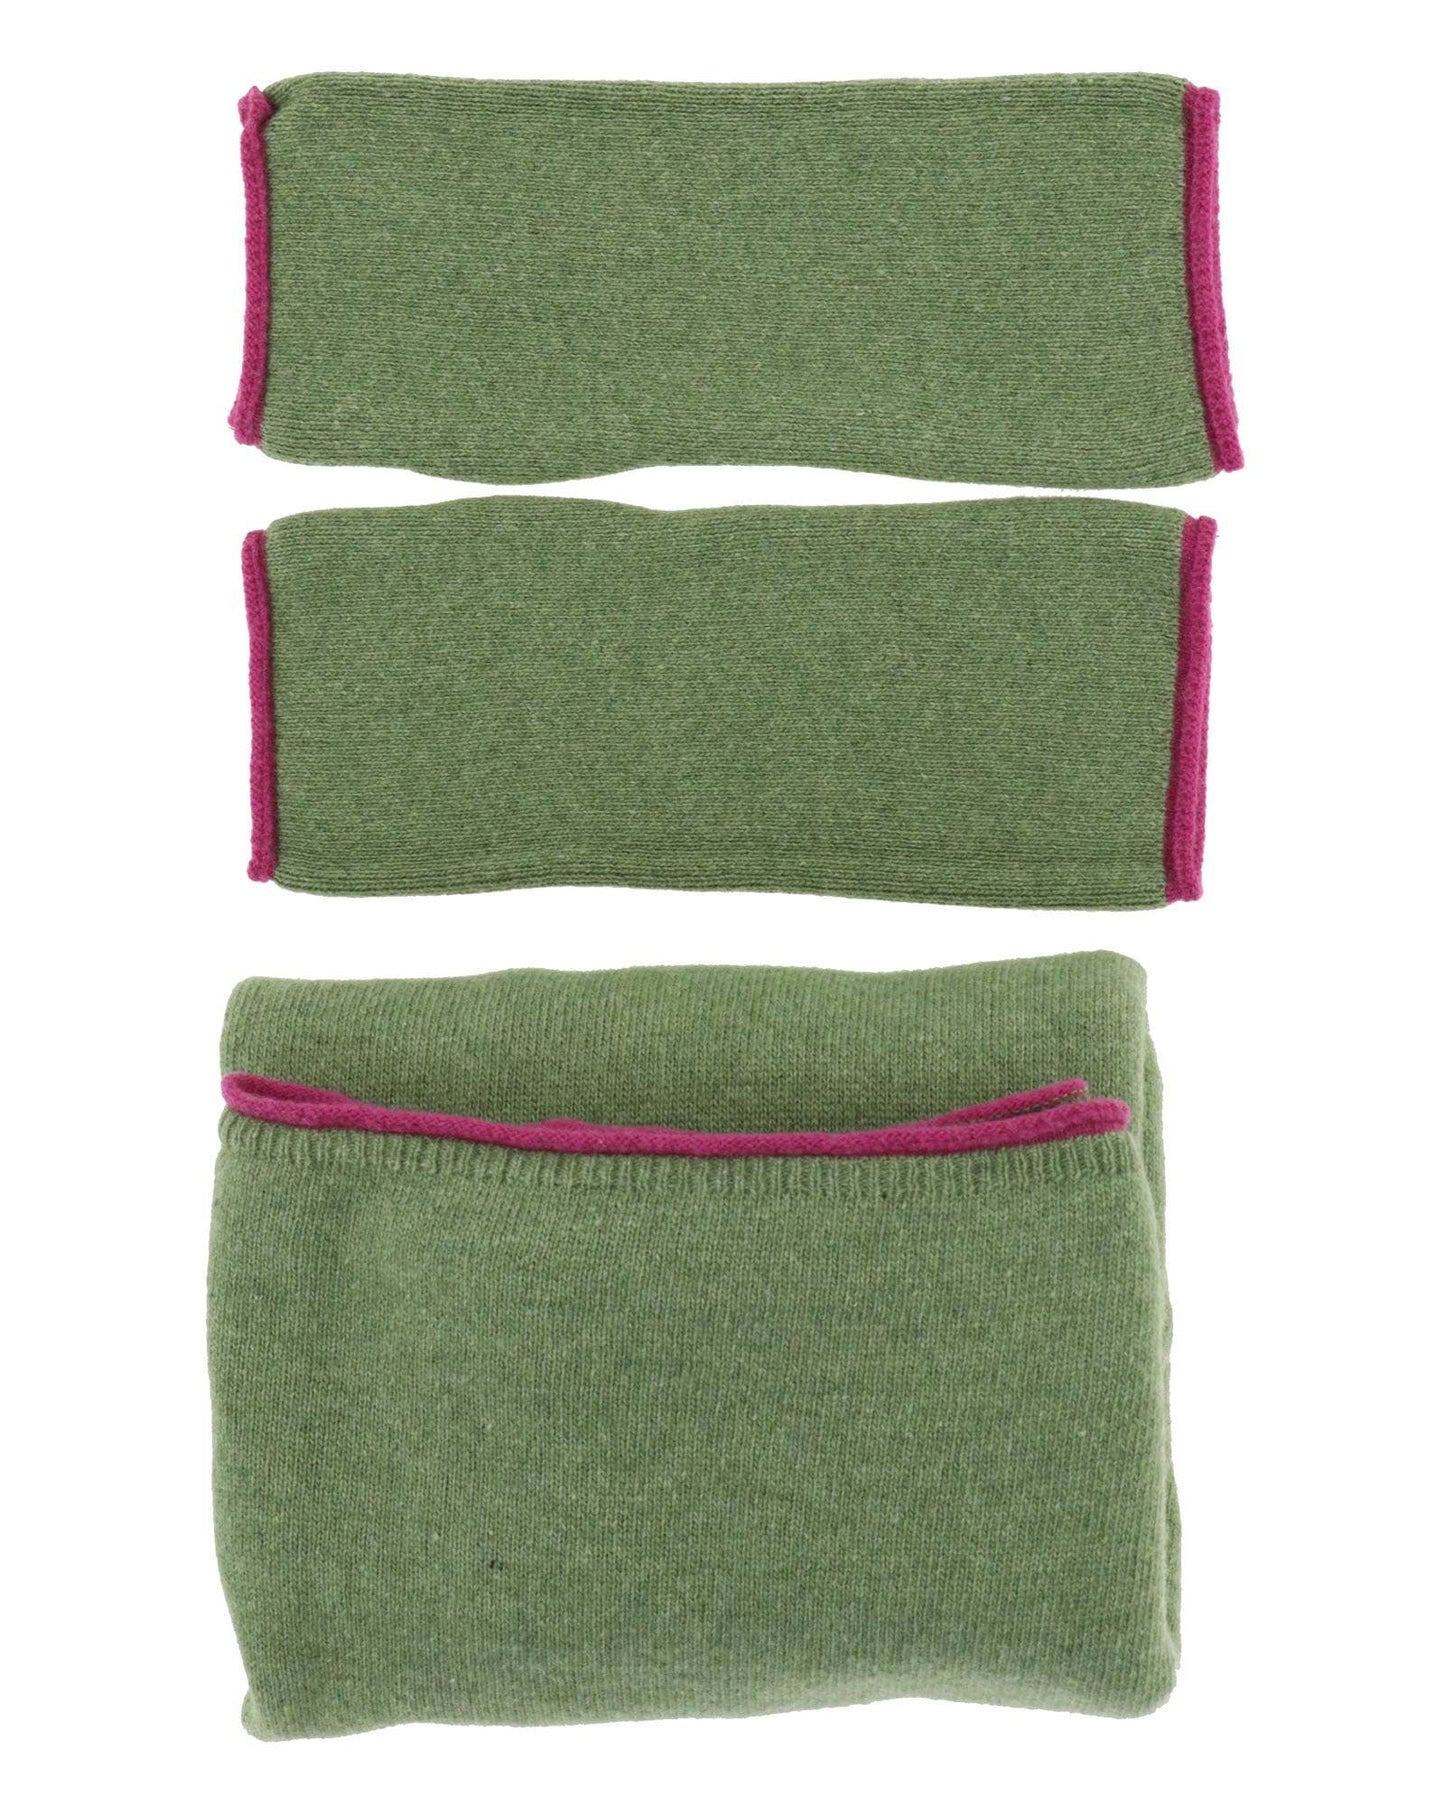 Cadenza Cashmere Blend Contrast Edge Wrist Warmers: Peacock and Ultraviolet